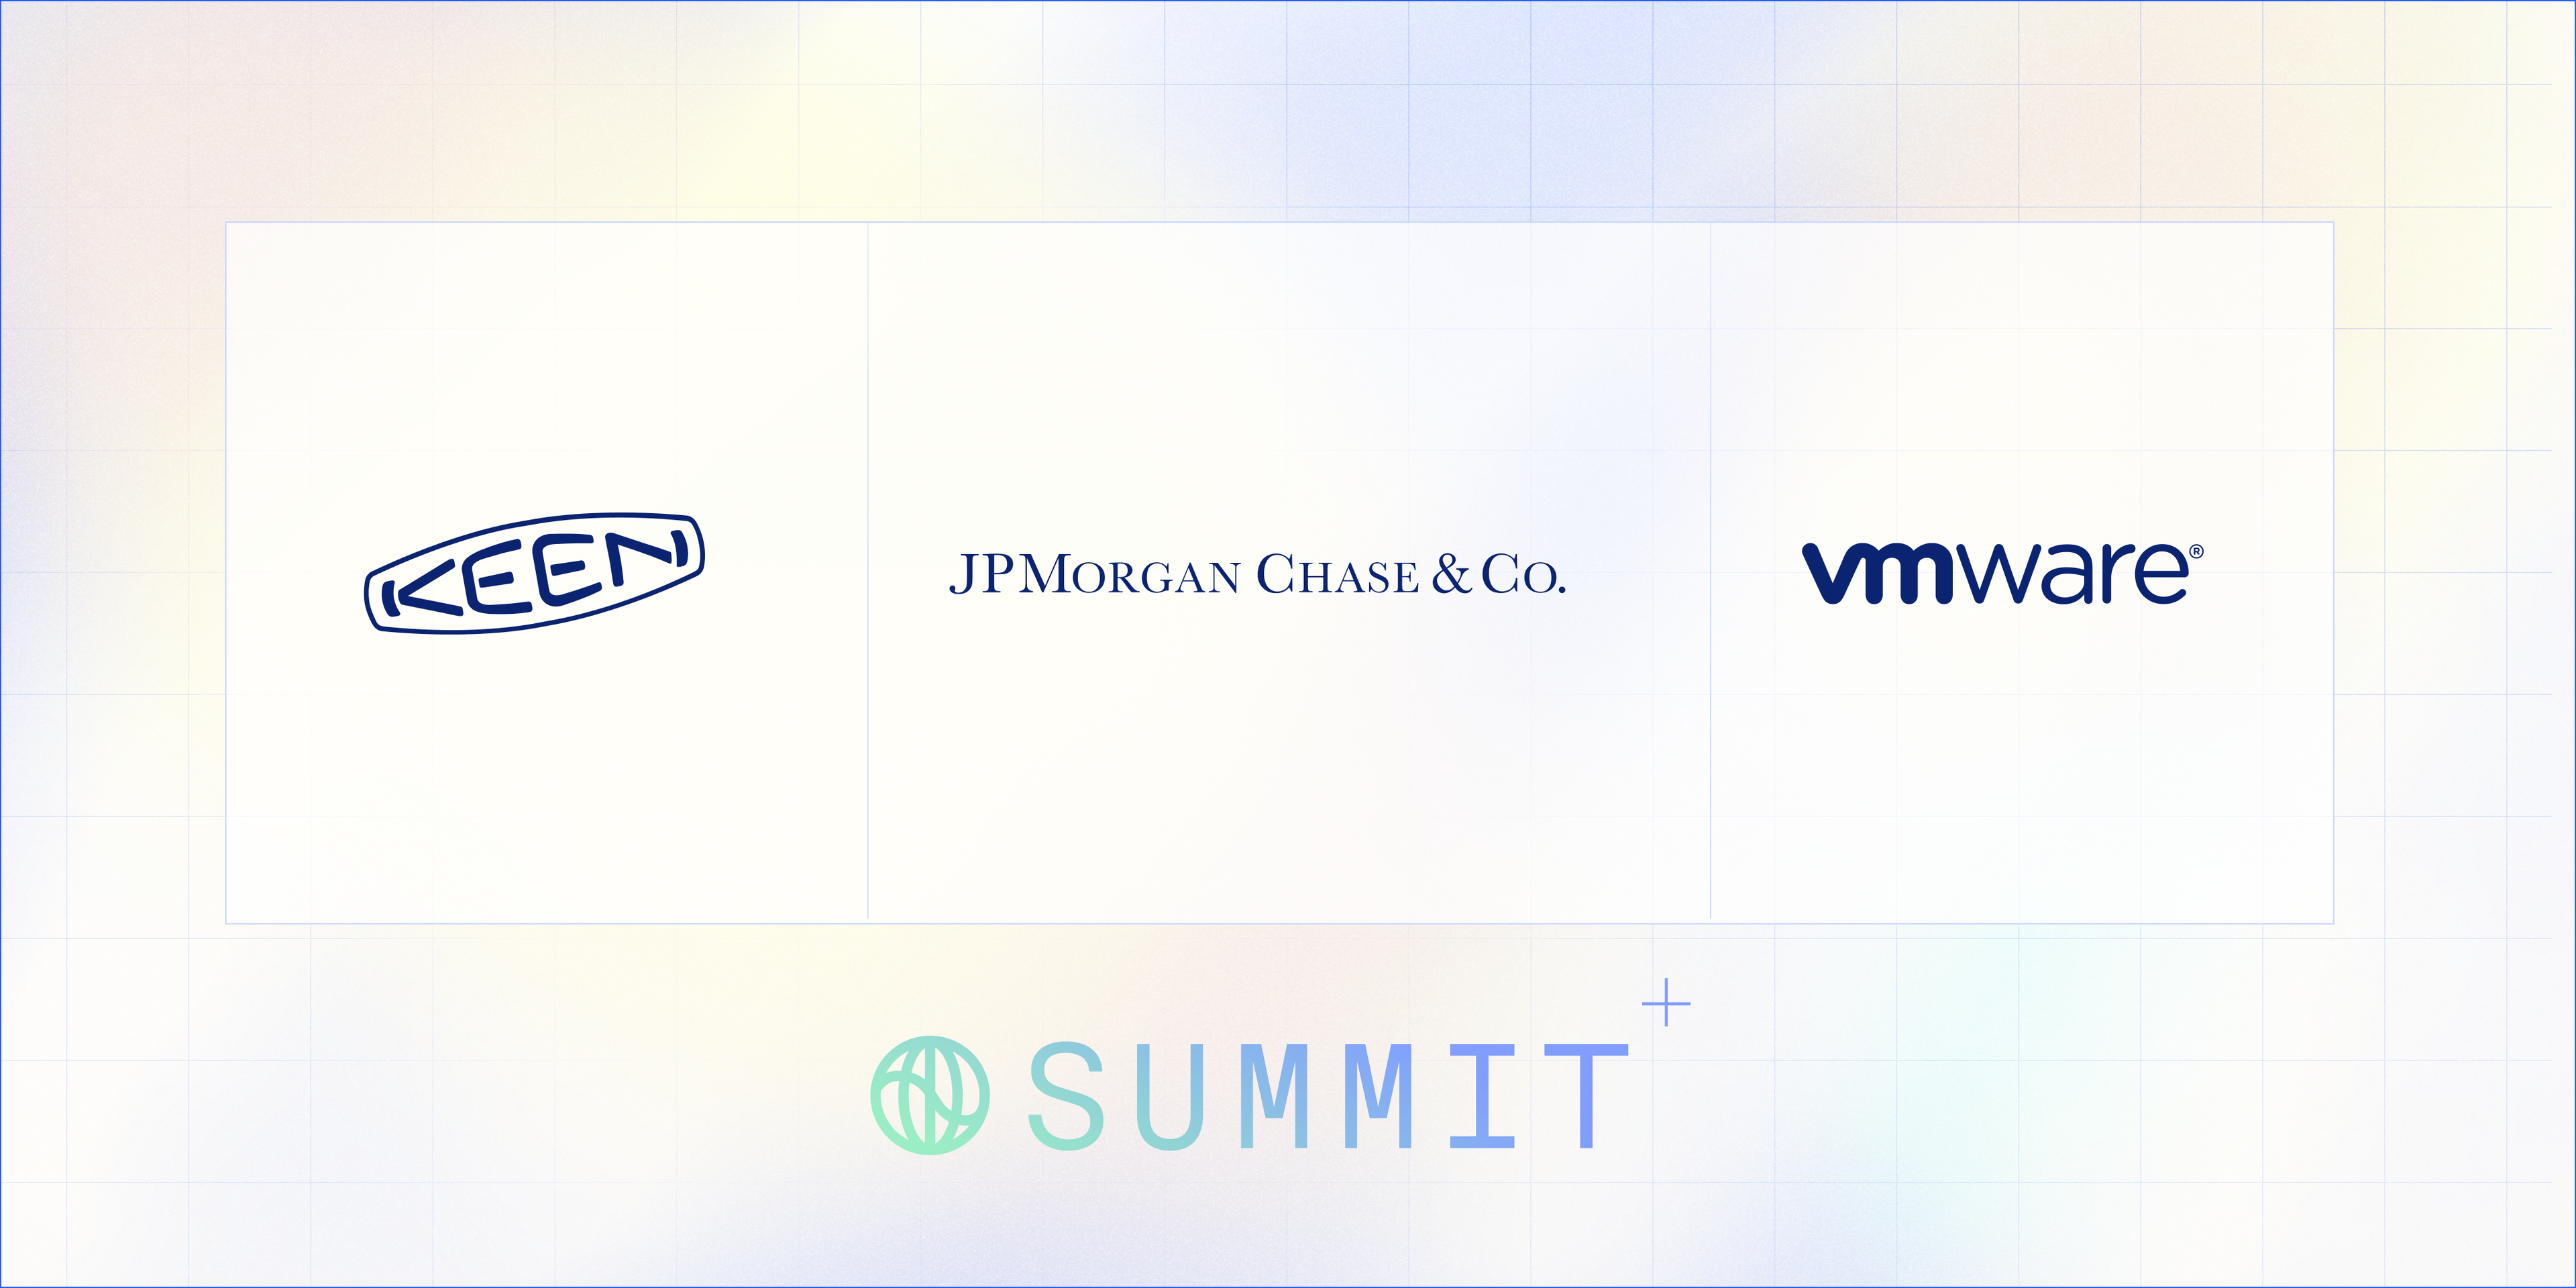 Keen, JPMorgan Chase & Co, and VMWare logos, with Watershed Summit logo on gradient grid